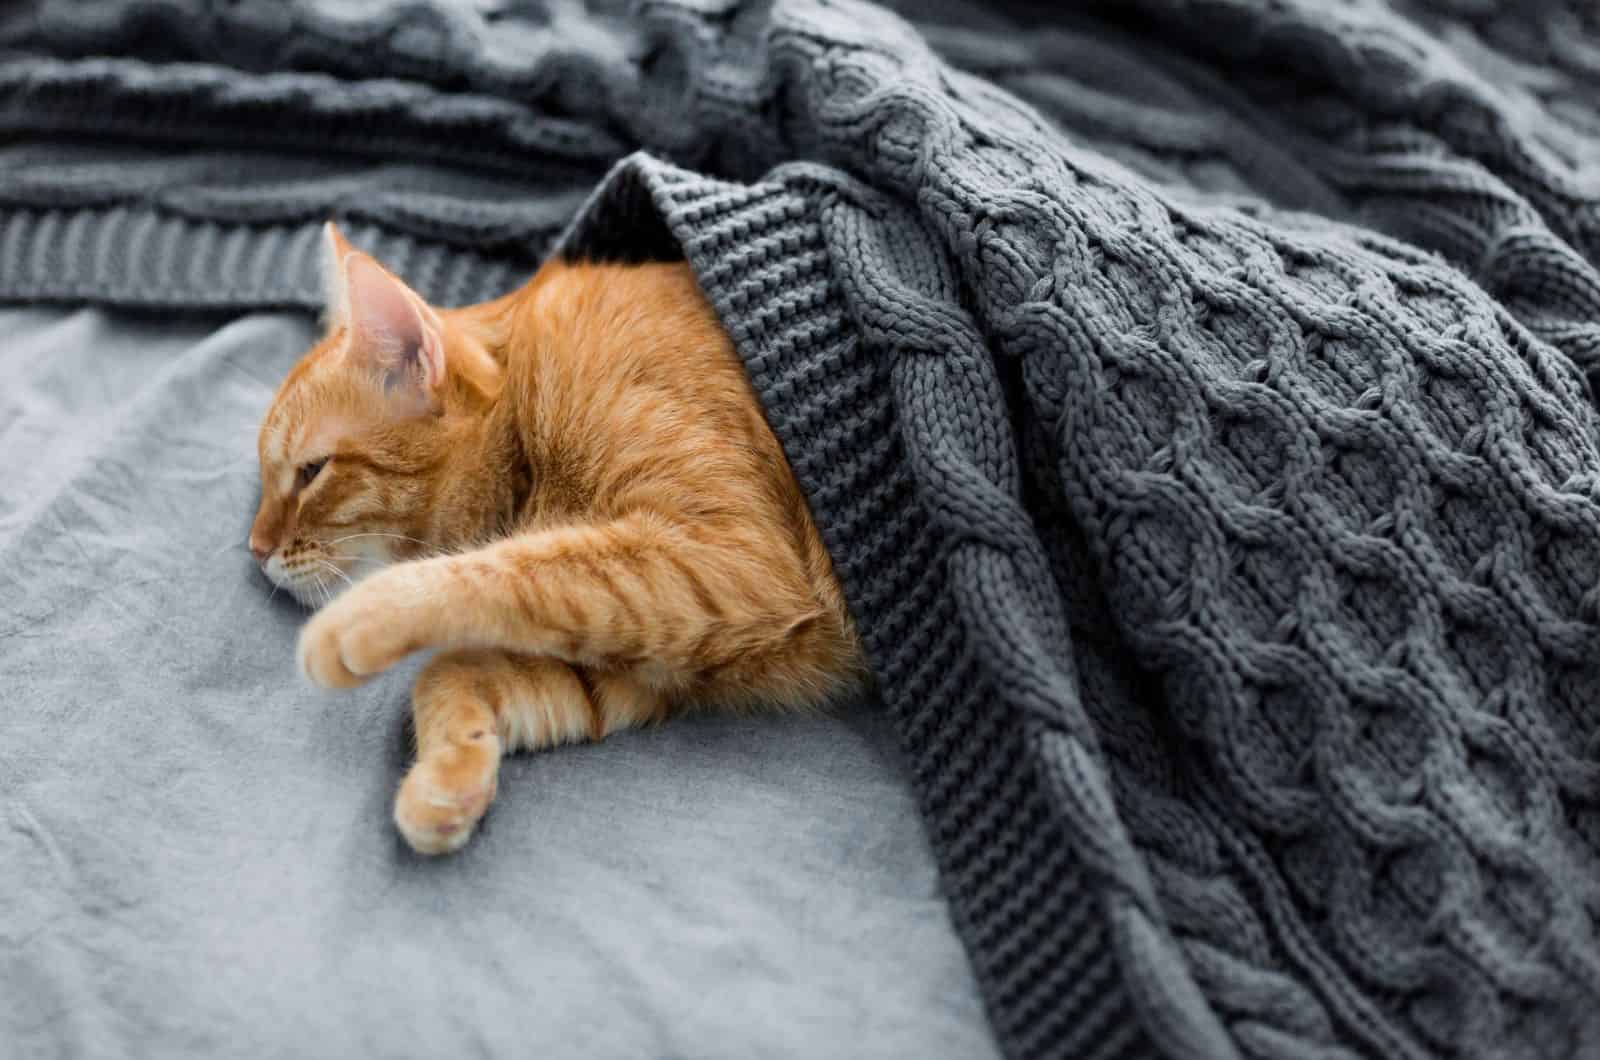 Red cat sleeps under a gray knitted plaid